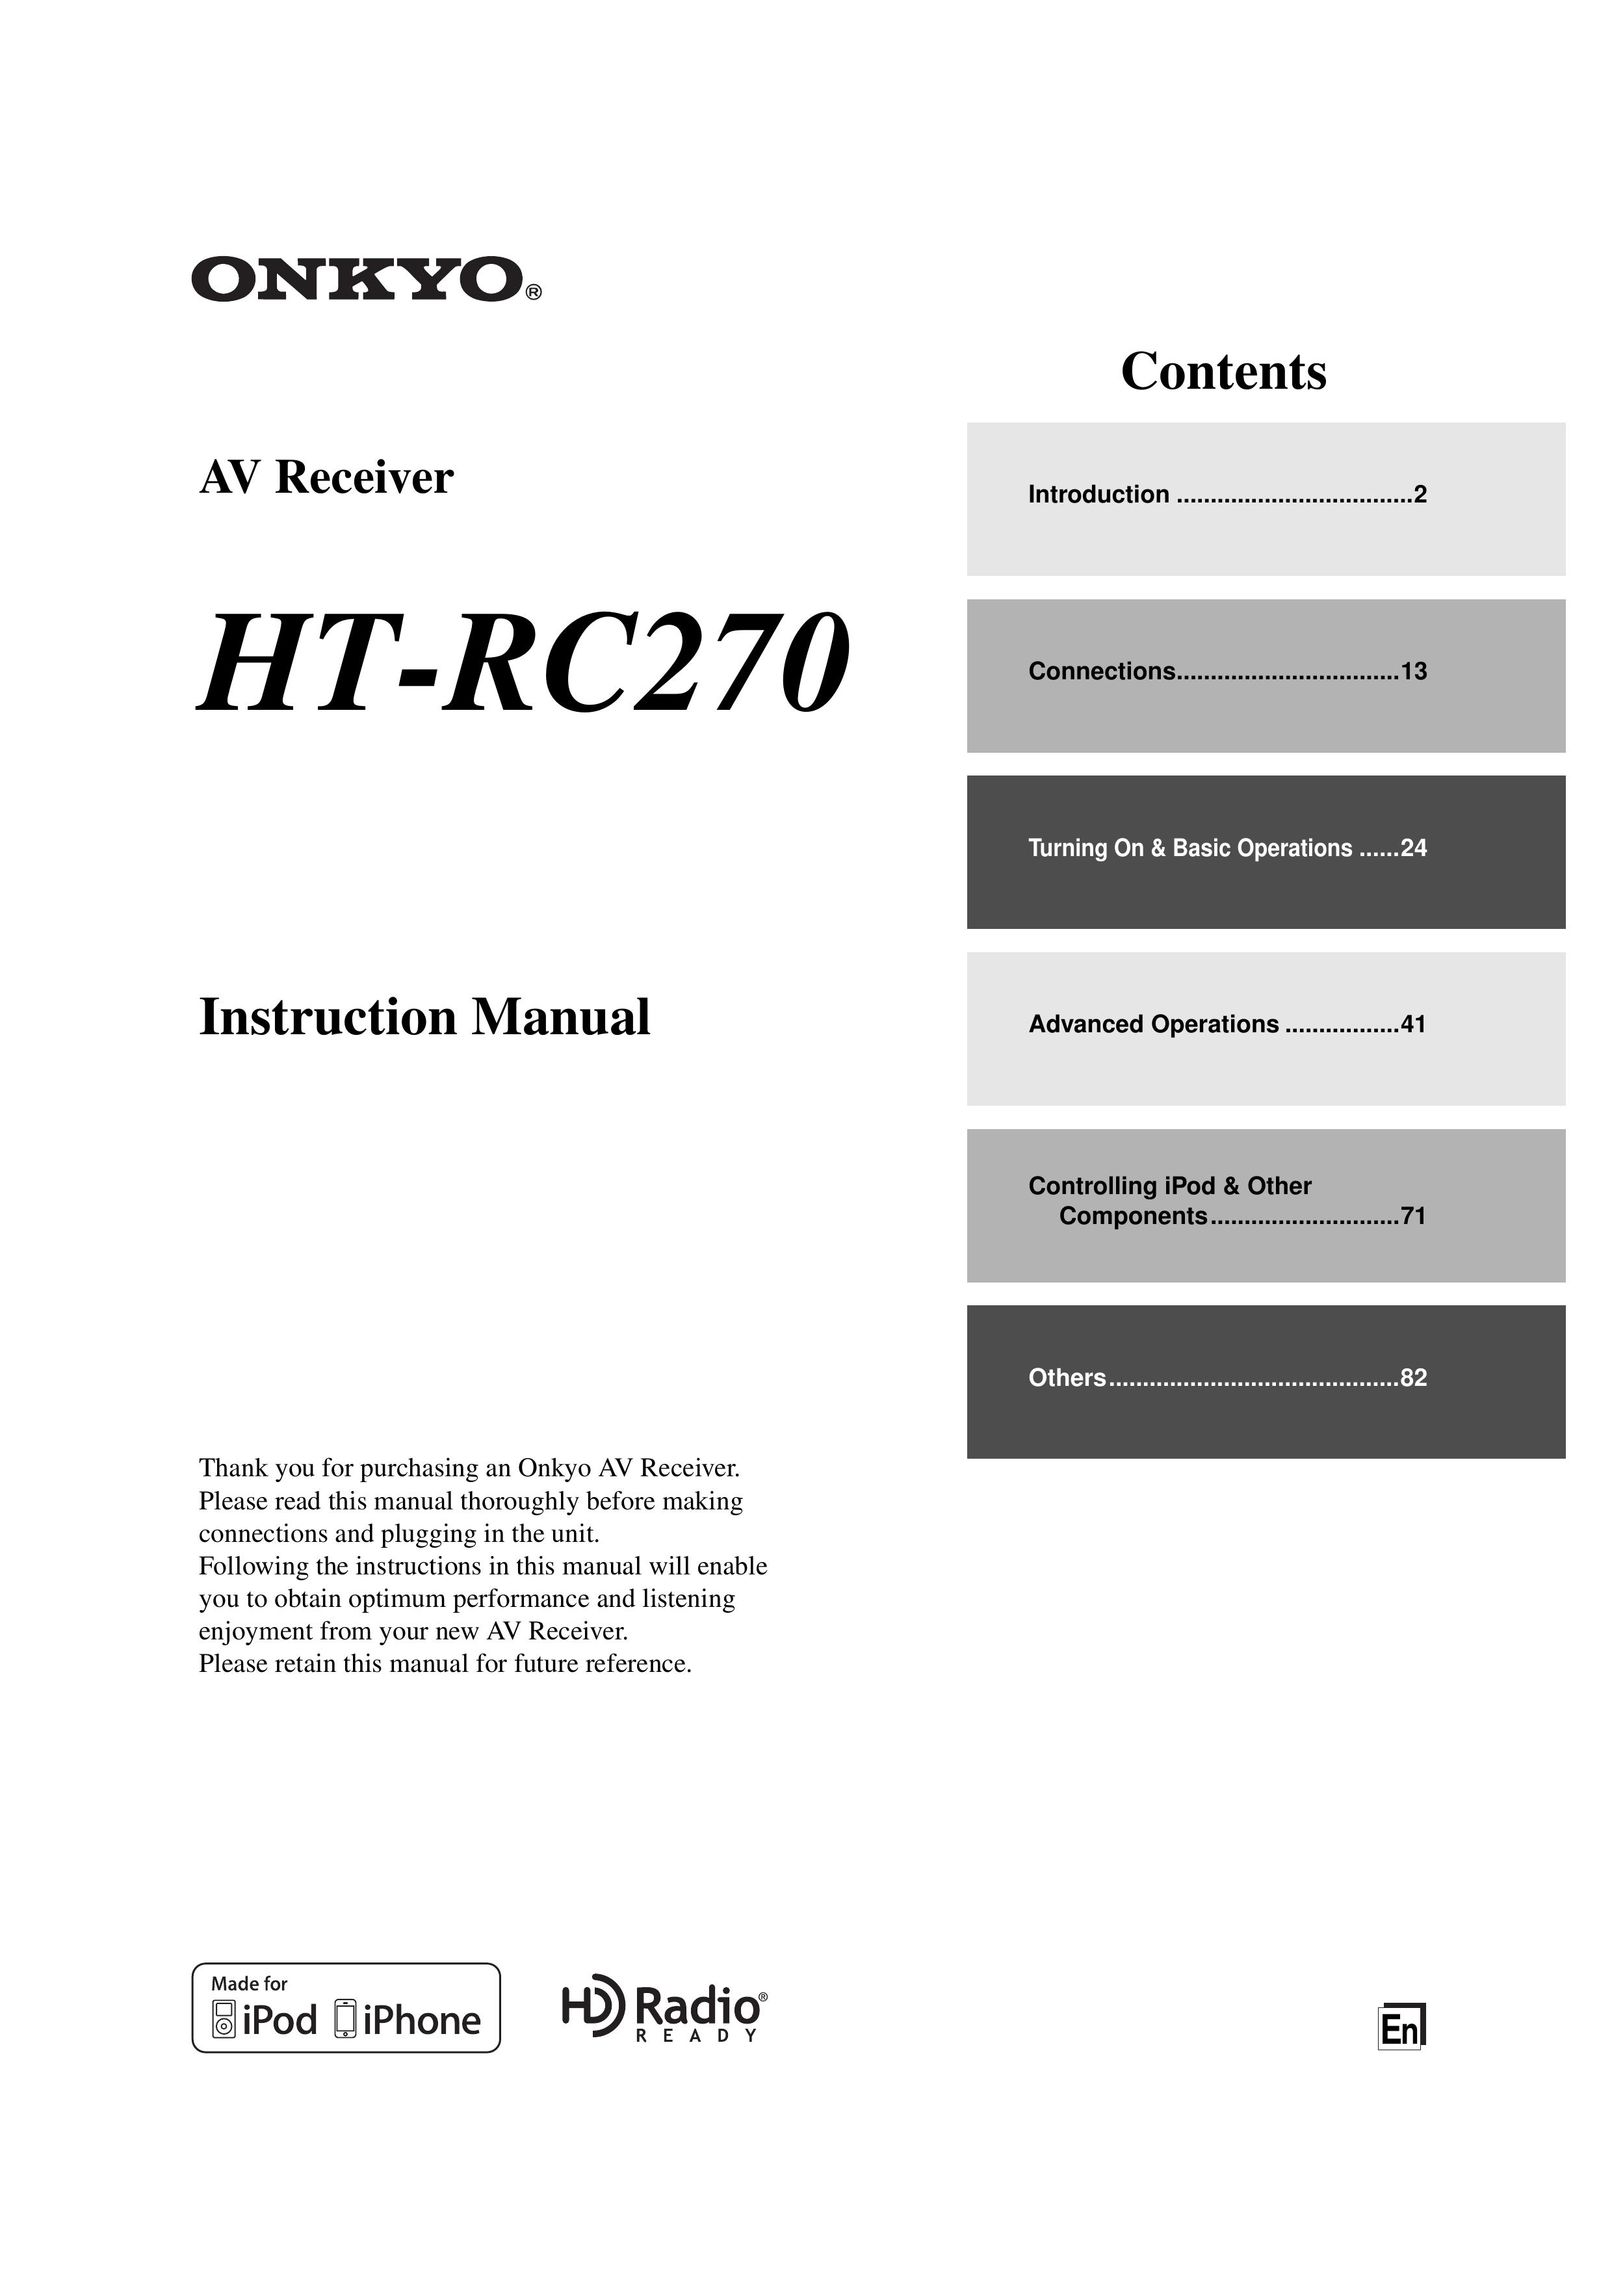 Onkyo HT-RC270 Stereo System User Manual